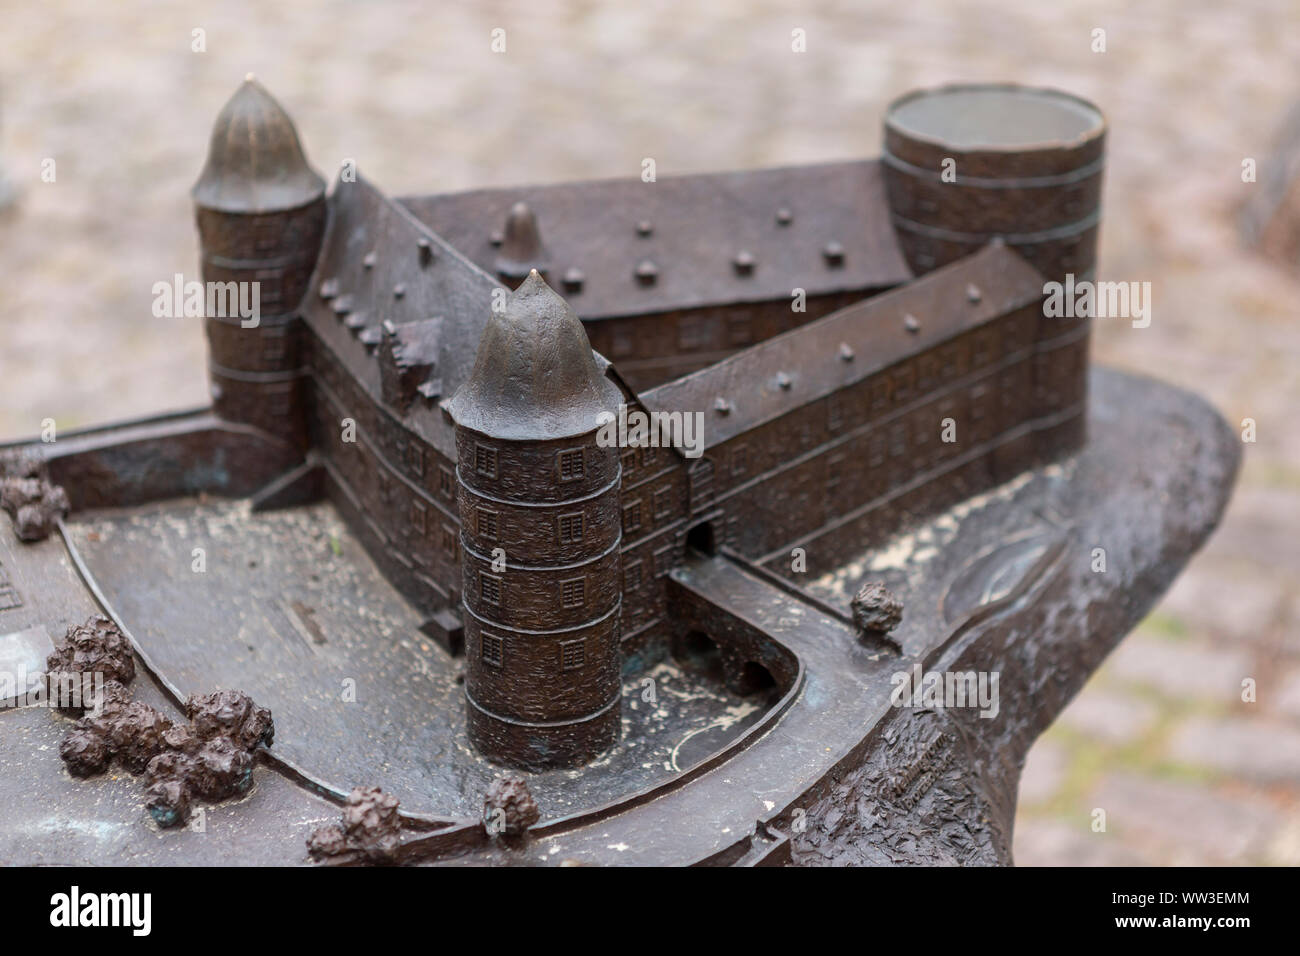 Bronze moulded maquette model of the triangle shaped castle and museum Wewelsburg Stock Photo